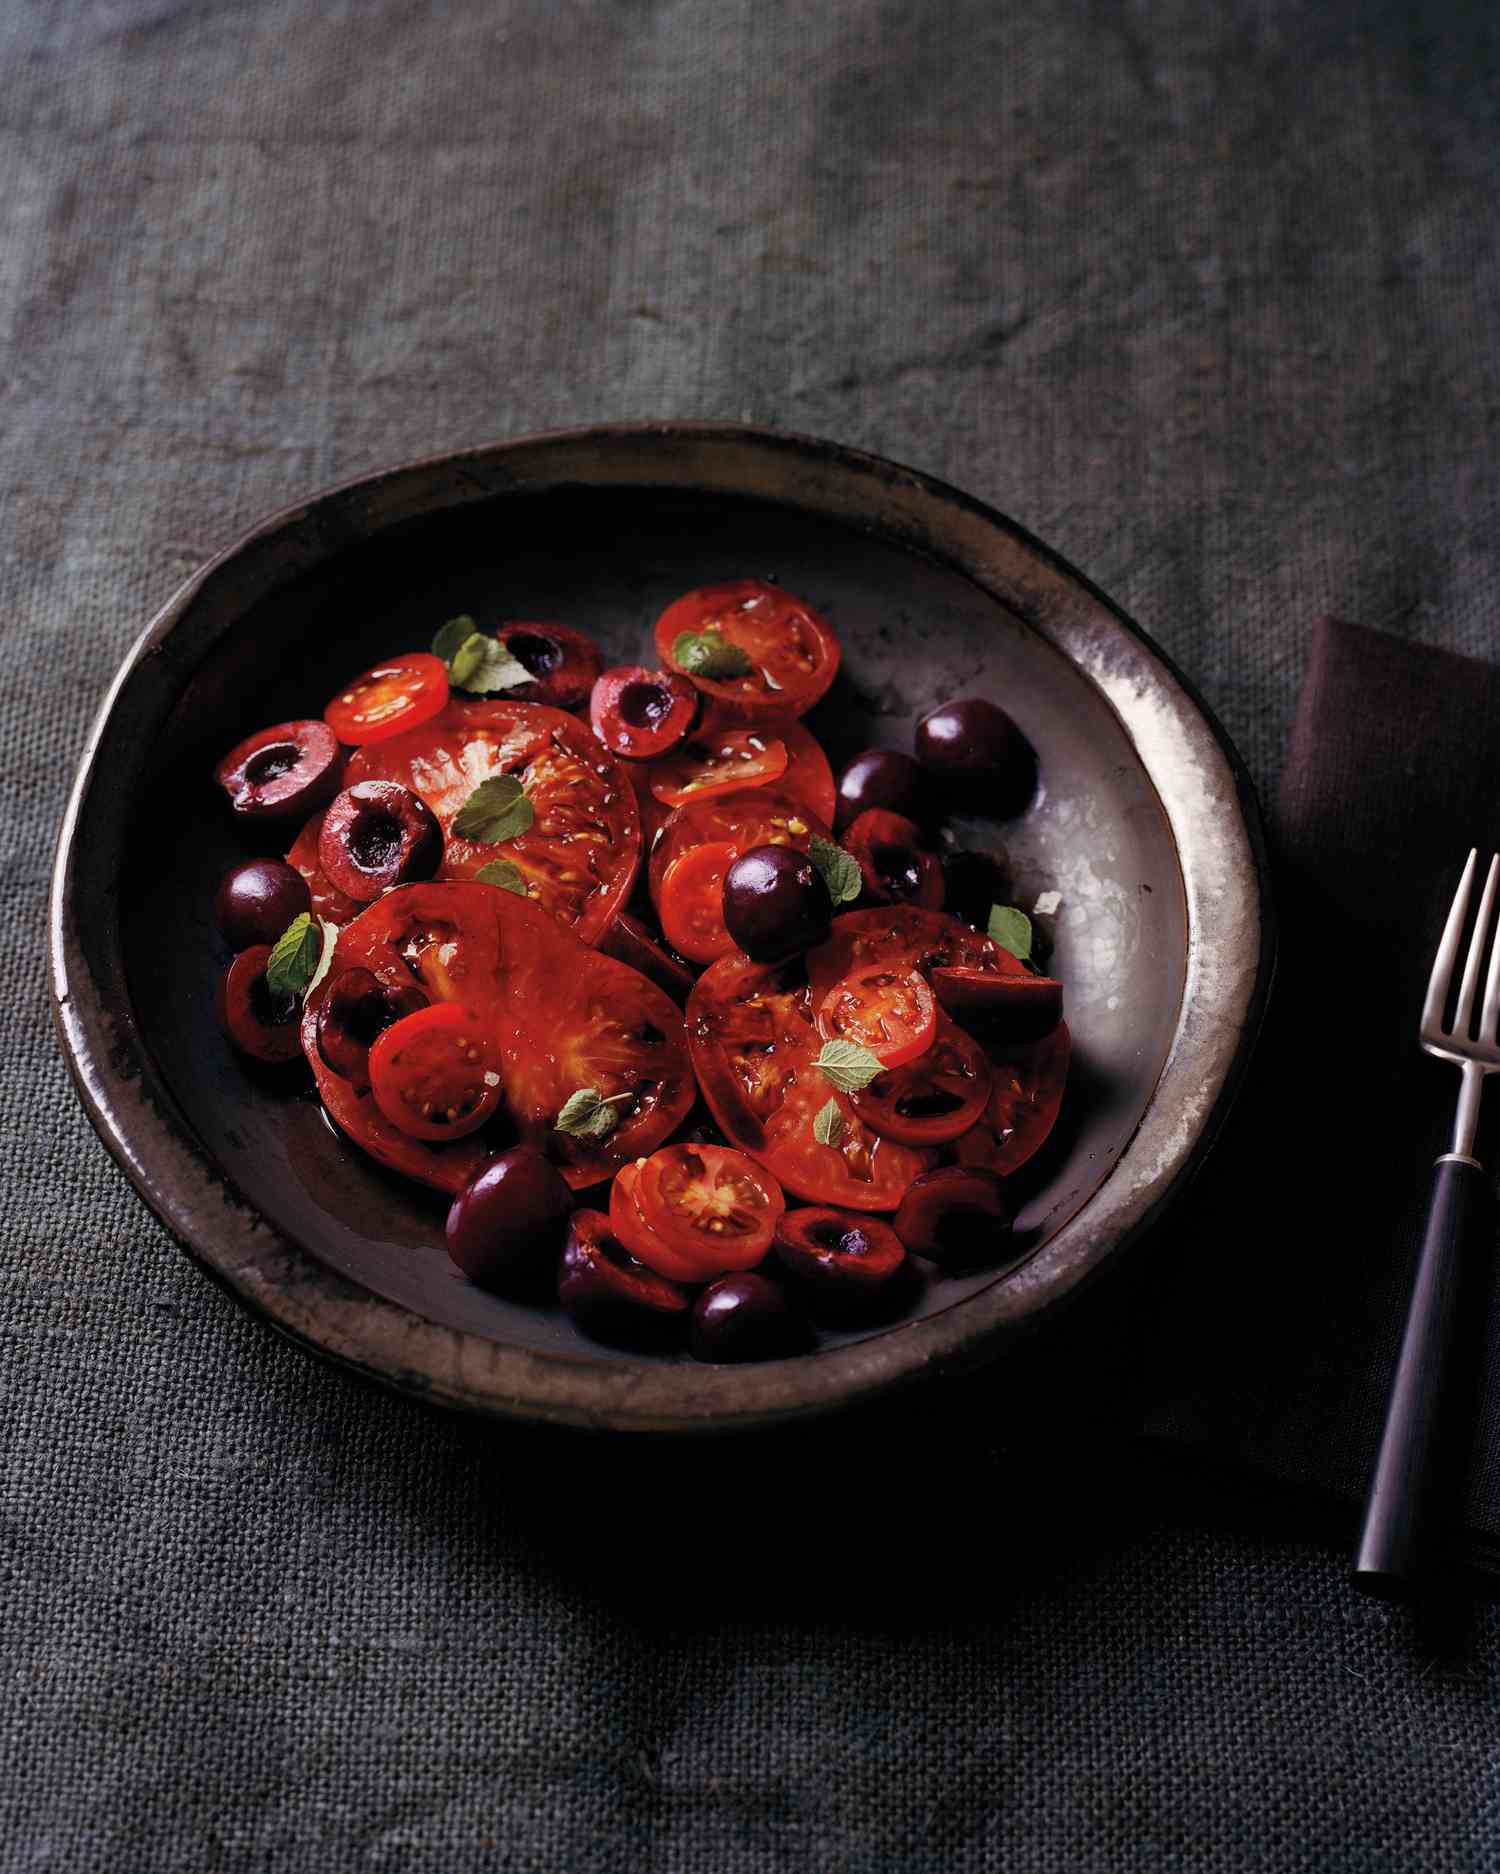 Heirloom Tomatoes with Cherries, Balsamic, and Hyssop